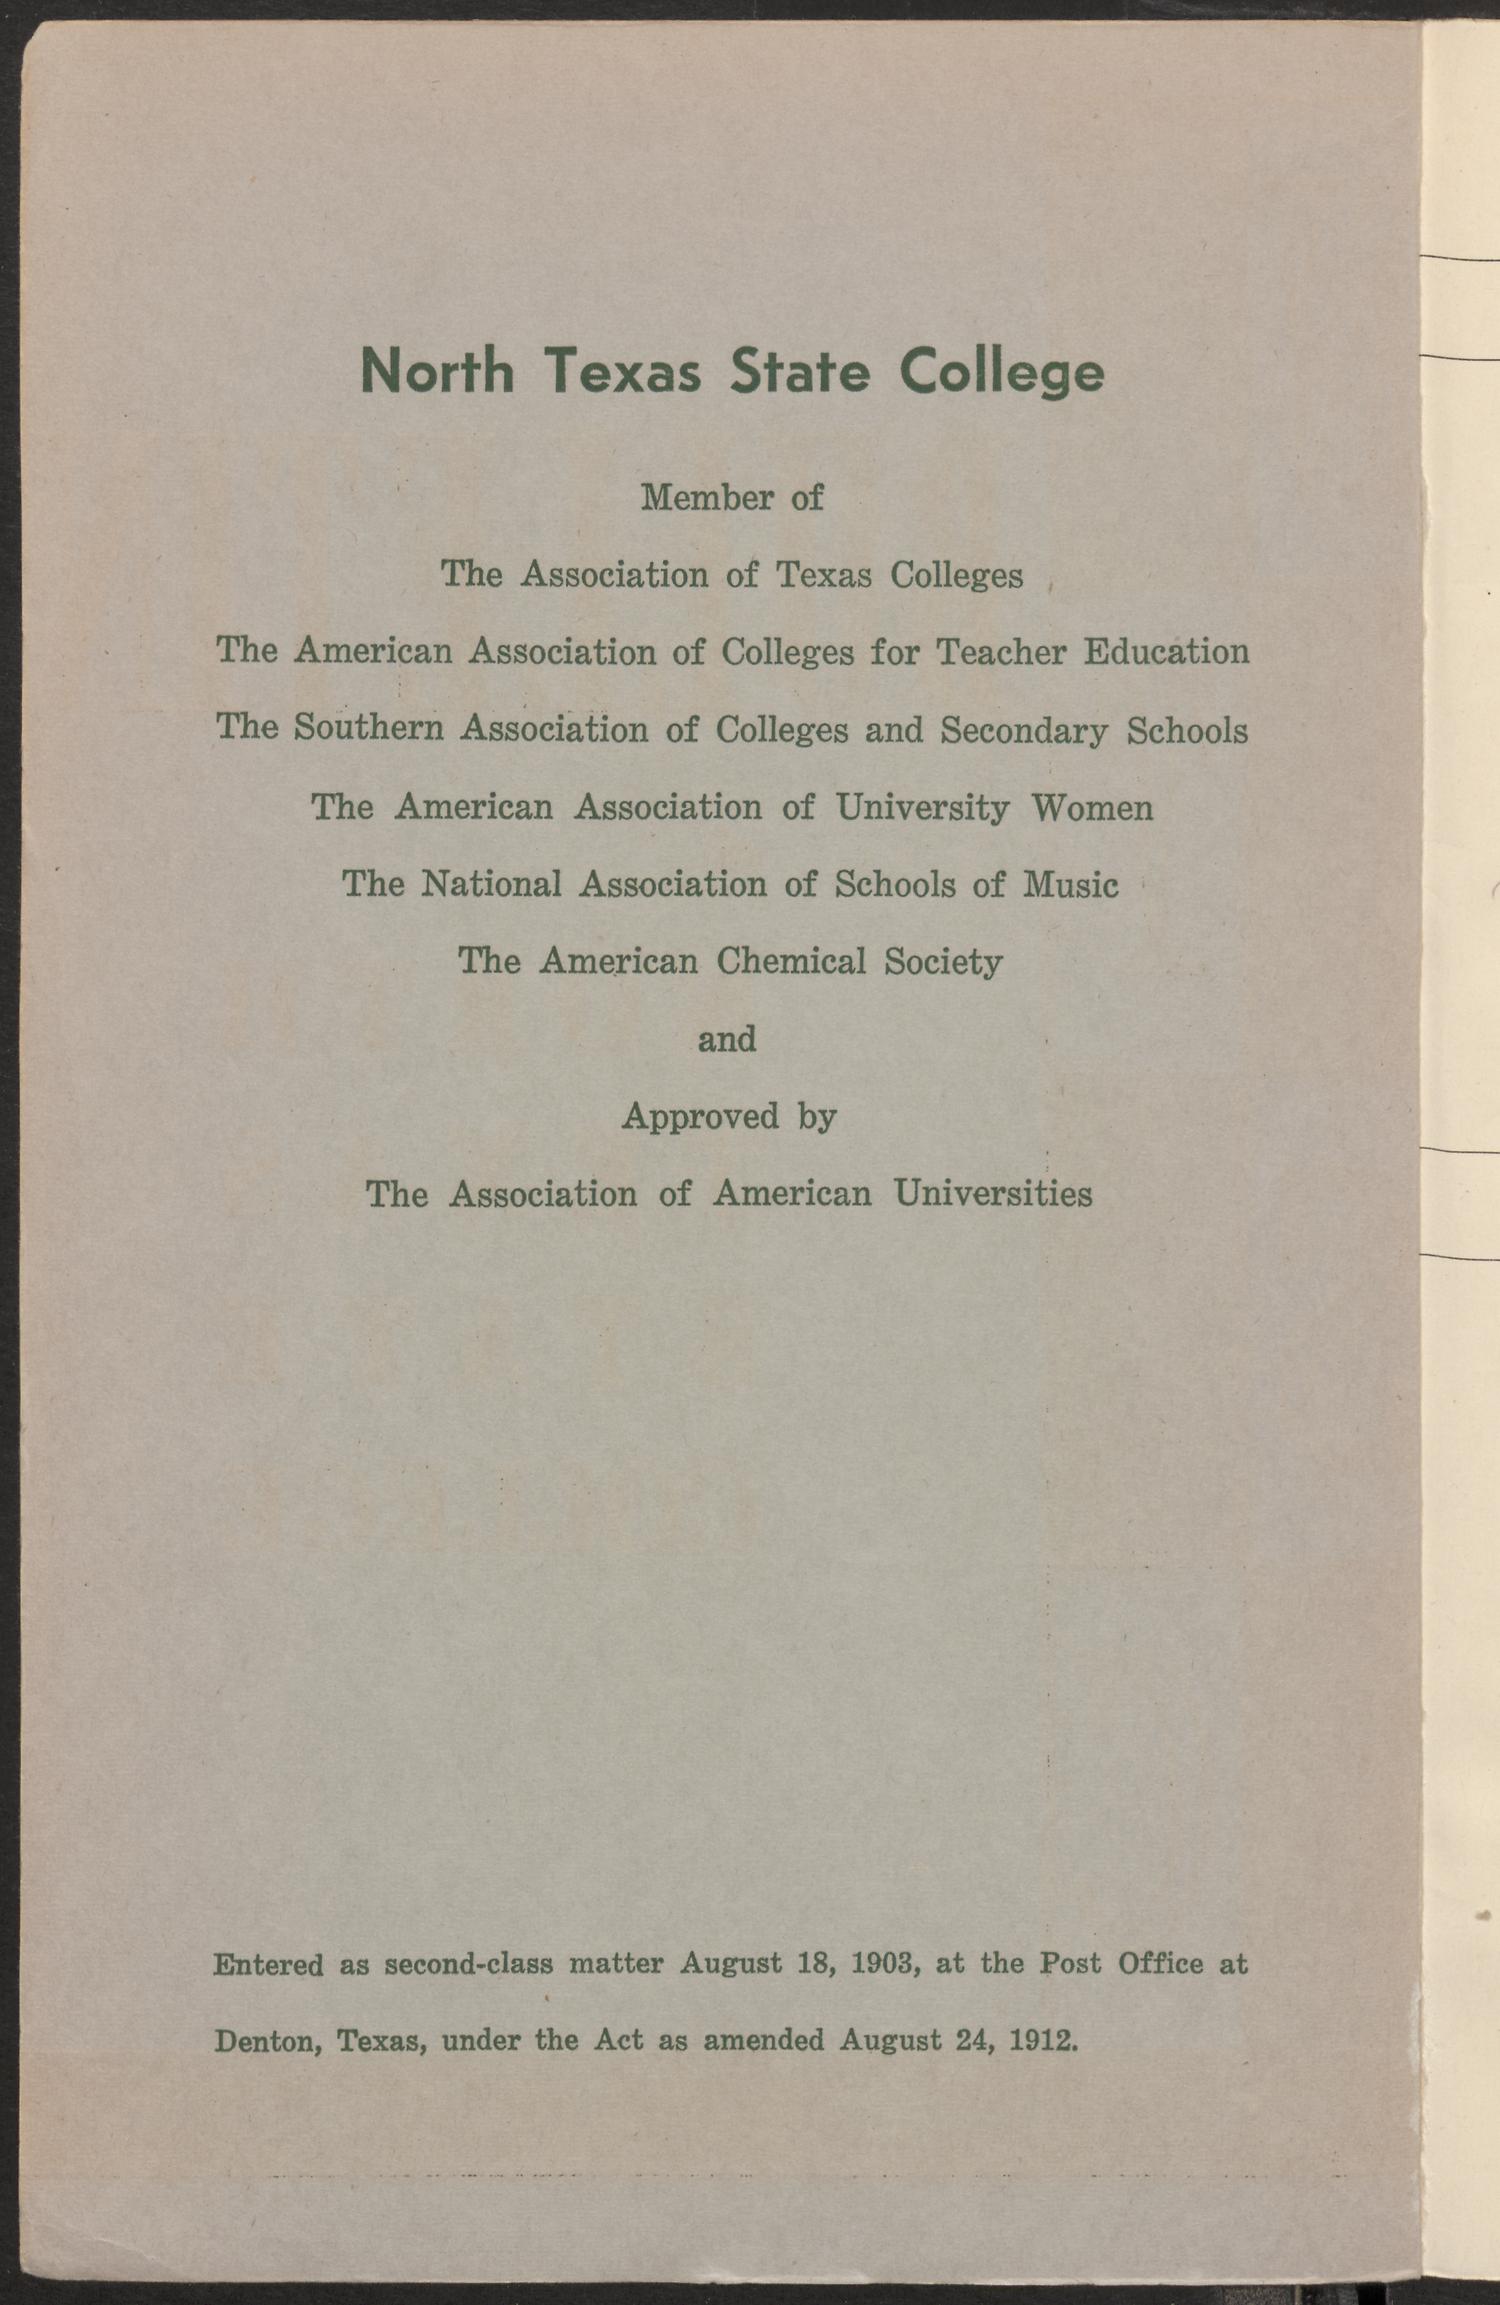 Catalog of North Texas State College: 1956-1957, Undergraduate
                                                
                                                    Front Inside
                                                